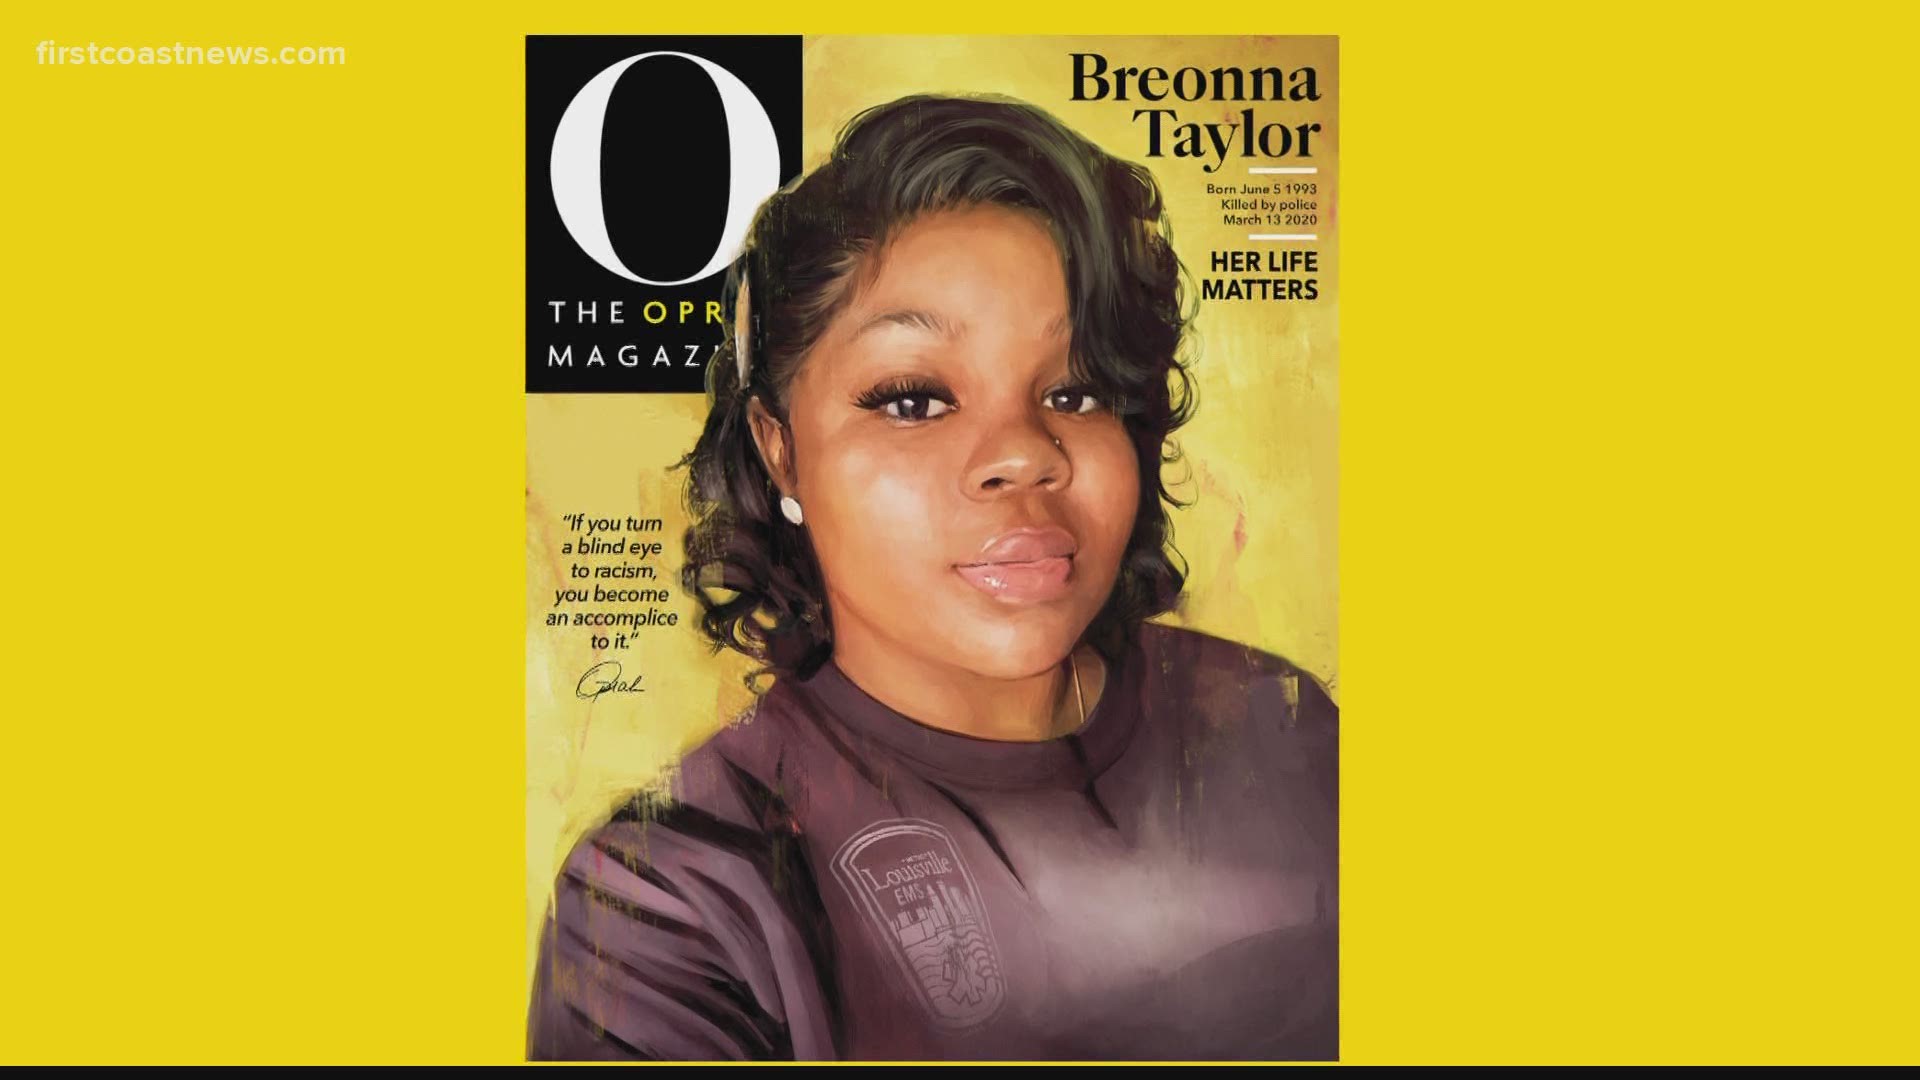 This is the first time that anyone has been featured that was not Oprah herself.